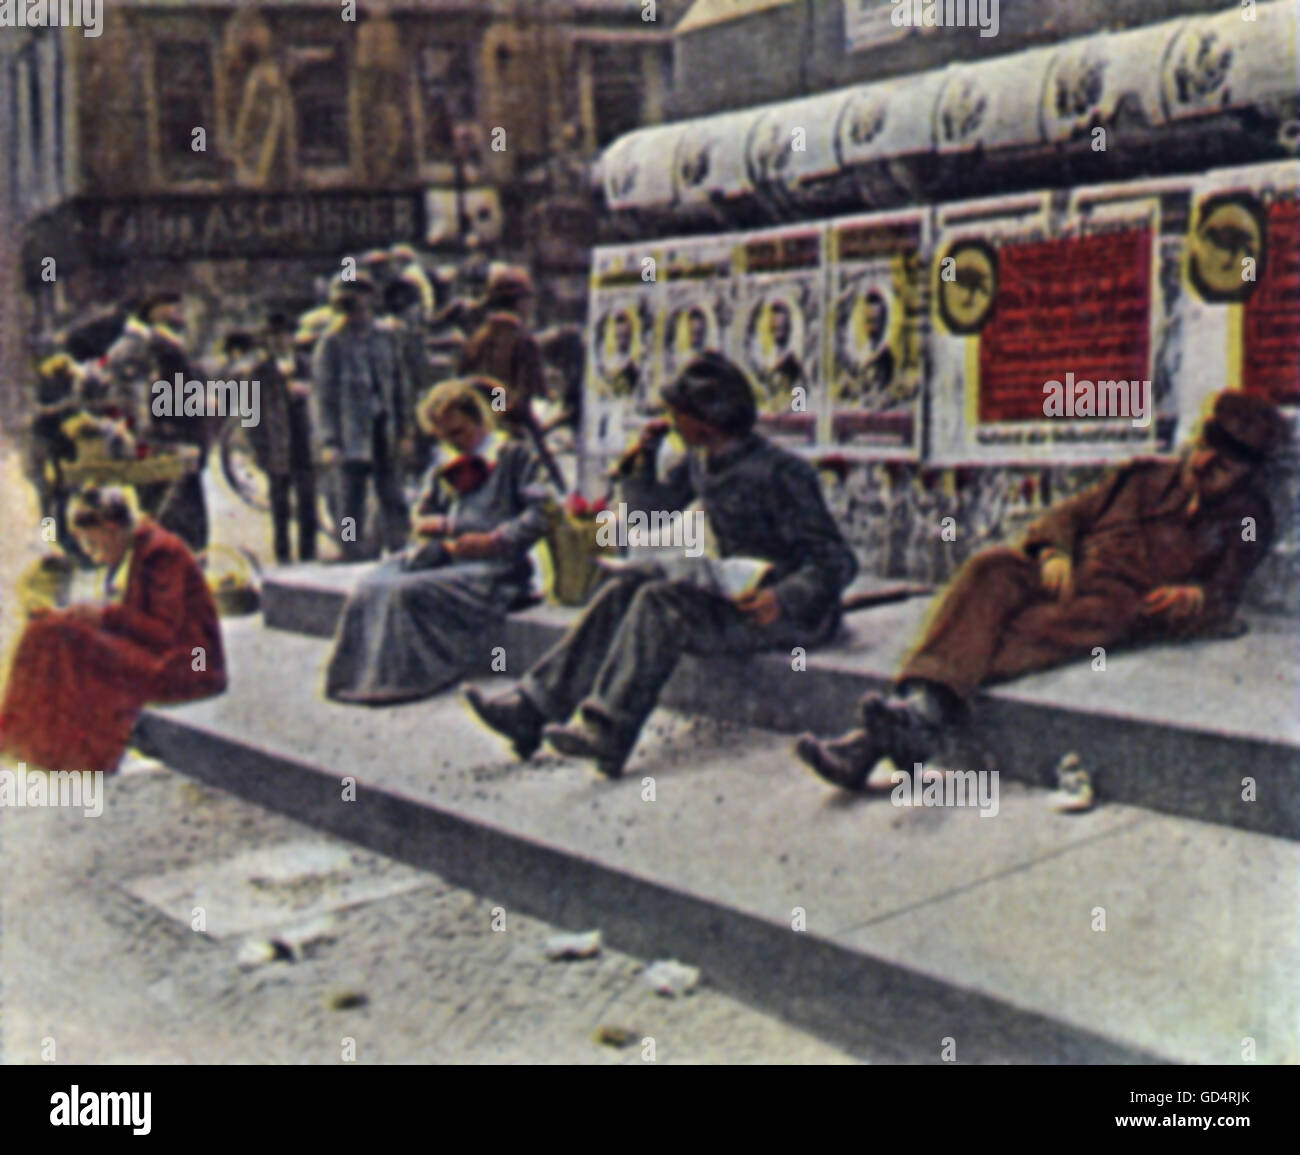 Demobilization 1918 - 1923, unemployment, unemployed at Alexanderplatz, Berlin, July 1921, coloured photograph, cigarette card, series 'Die Nachkriegszeit', 1935, Additional-Rights-Clearences-Not Available Stock Photo